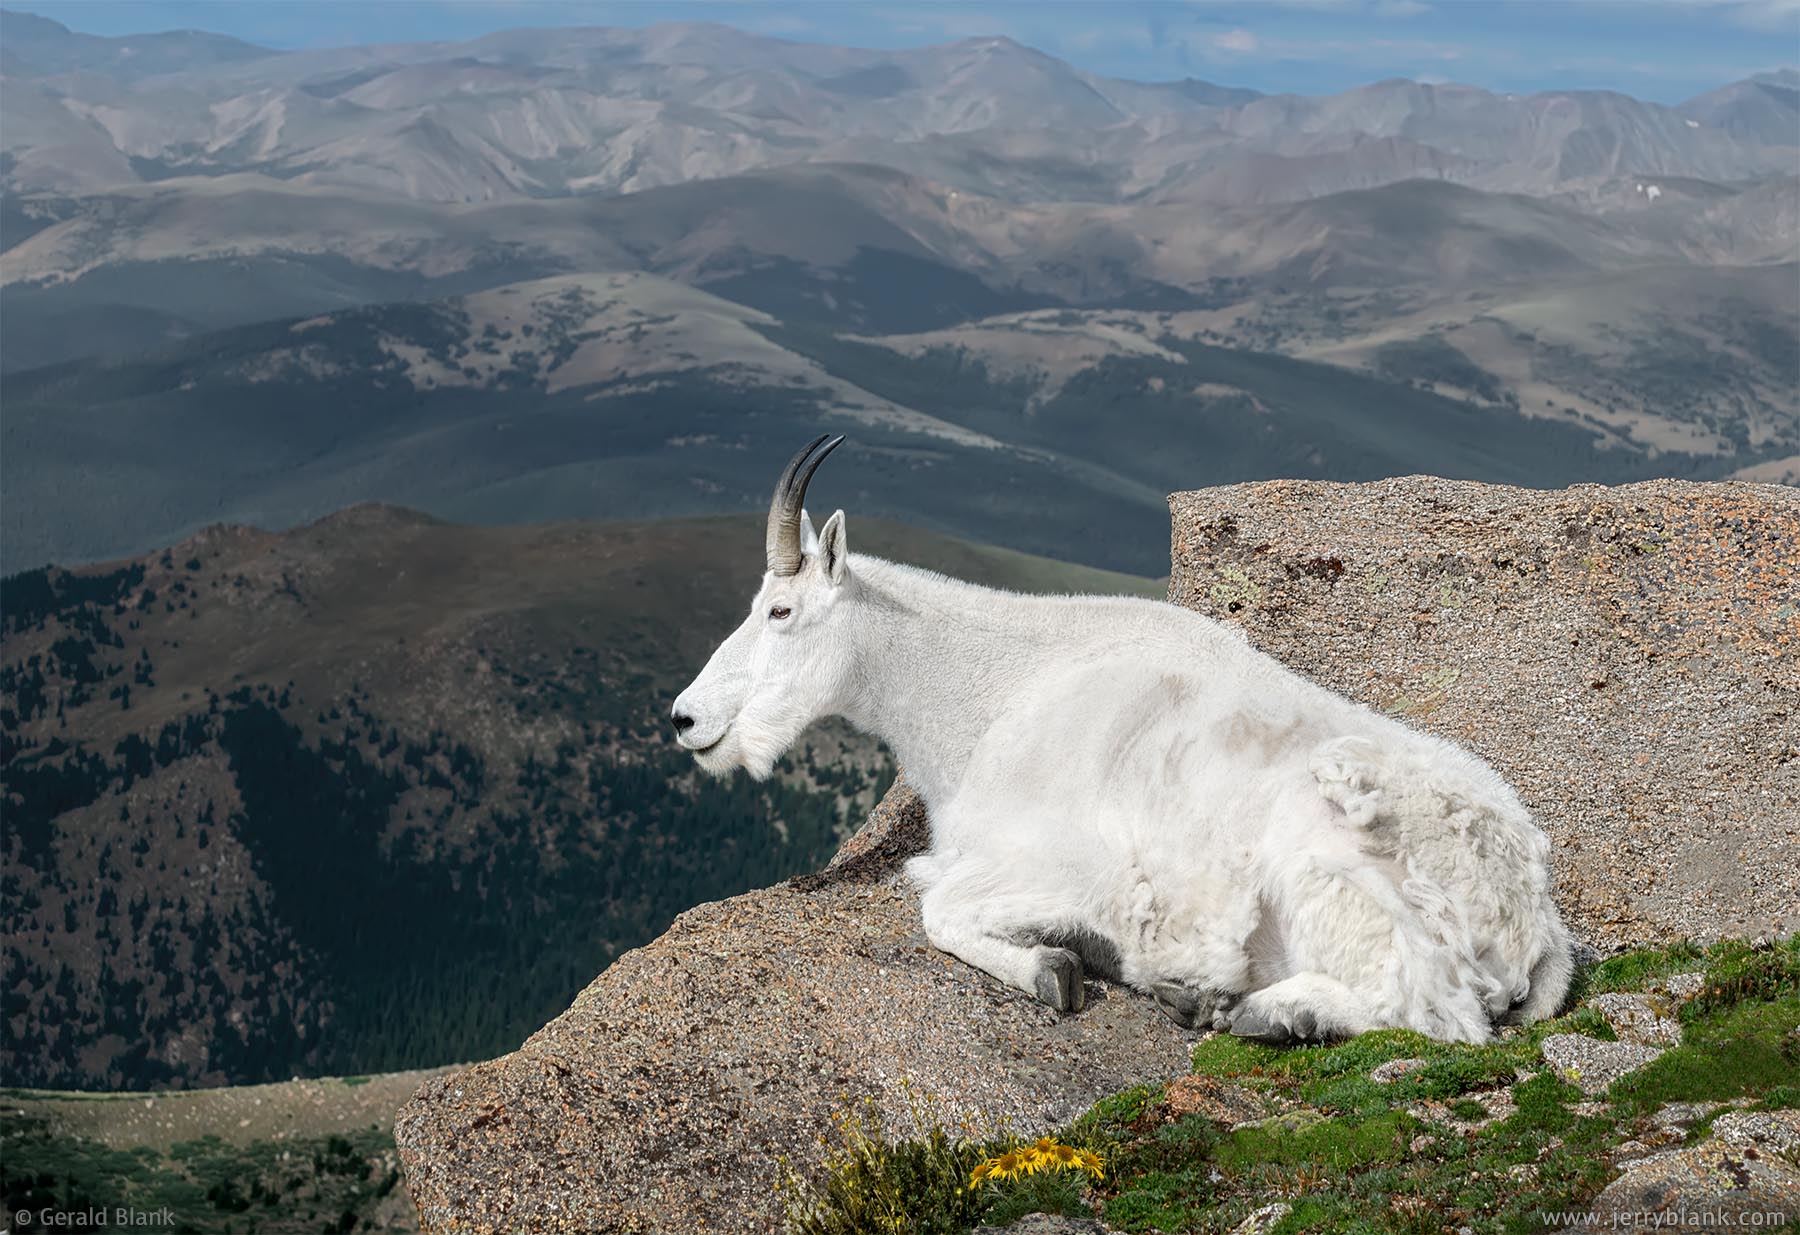 #20537 - A mountain goat enjoys the view from Mount Evans, Colorado - photo by Jerry Blank